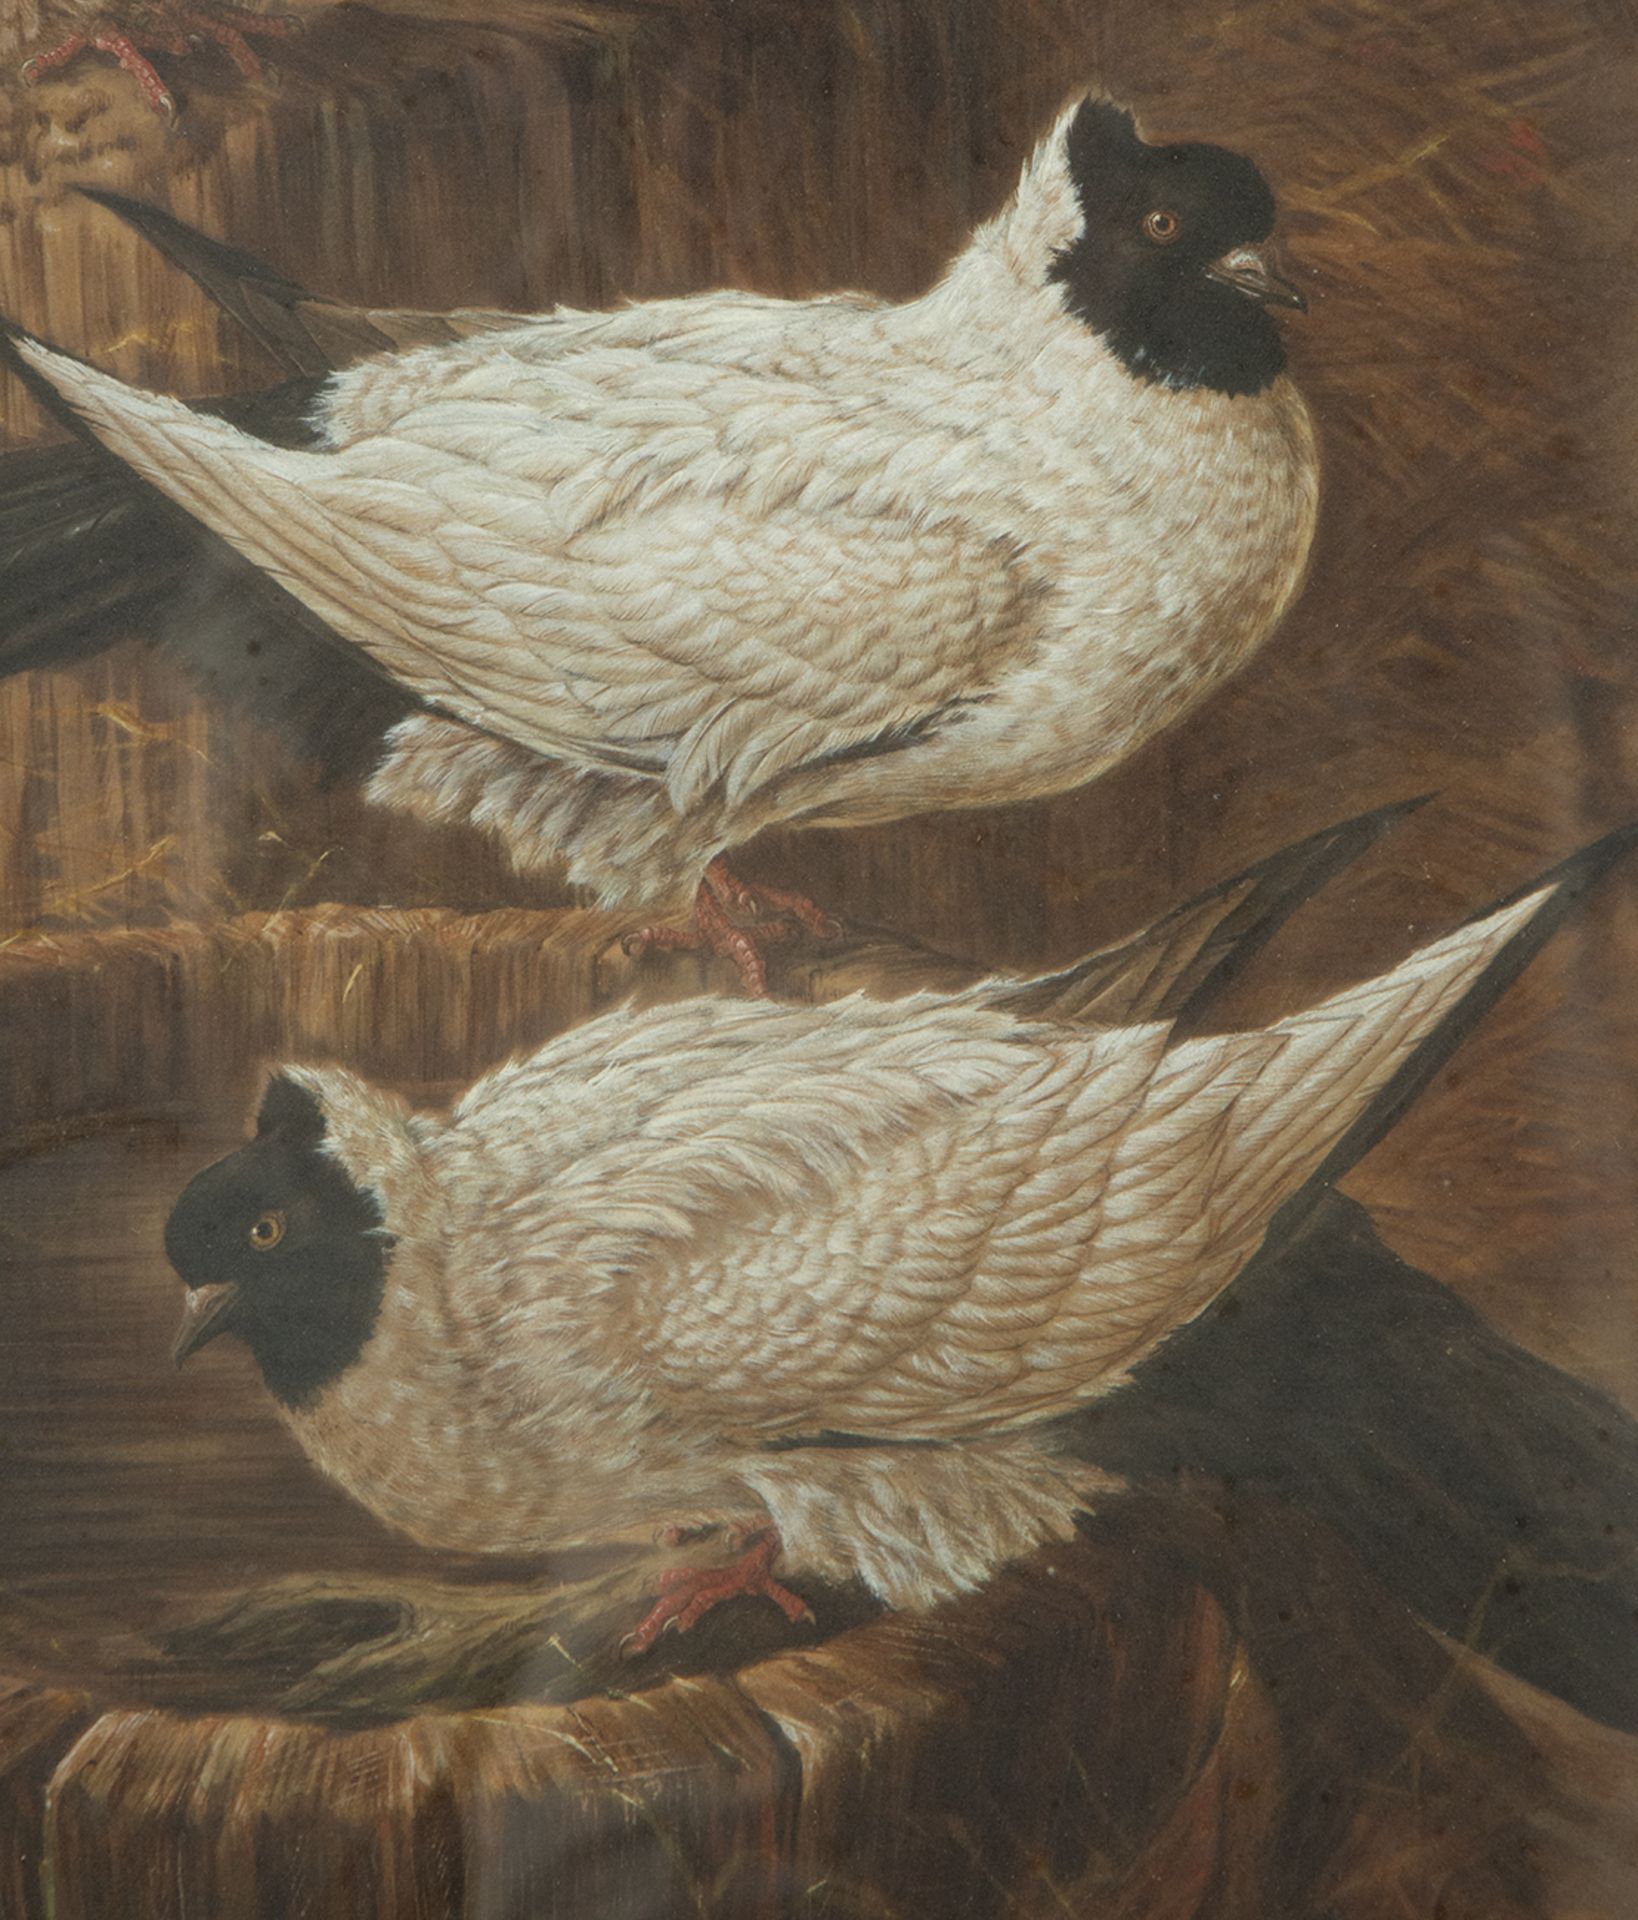 "Pigeons", watercolor on paper, Harold Wright (1897-1964), 19th century English School - Image 2 of 5